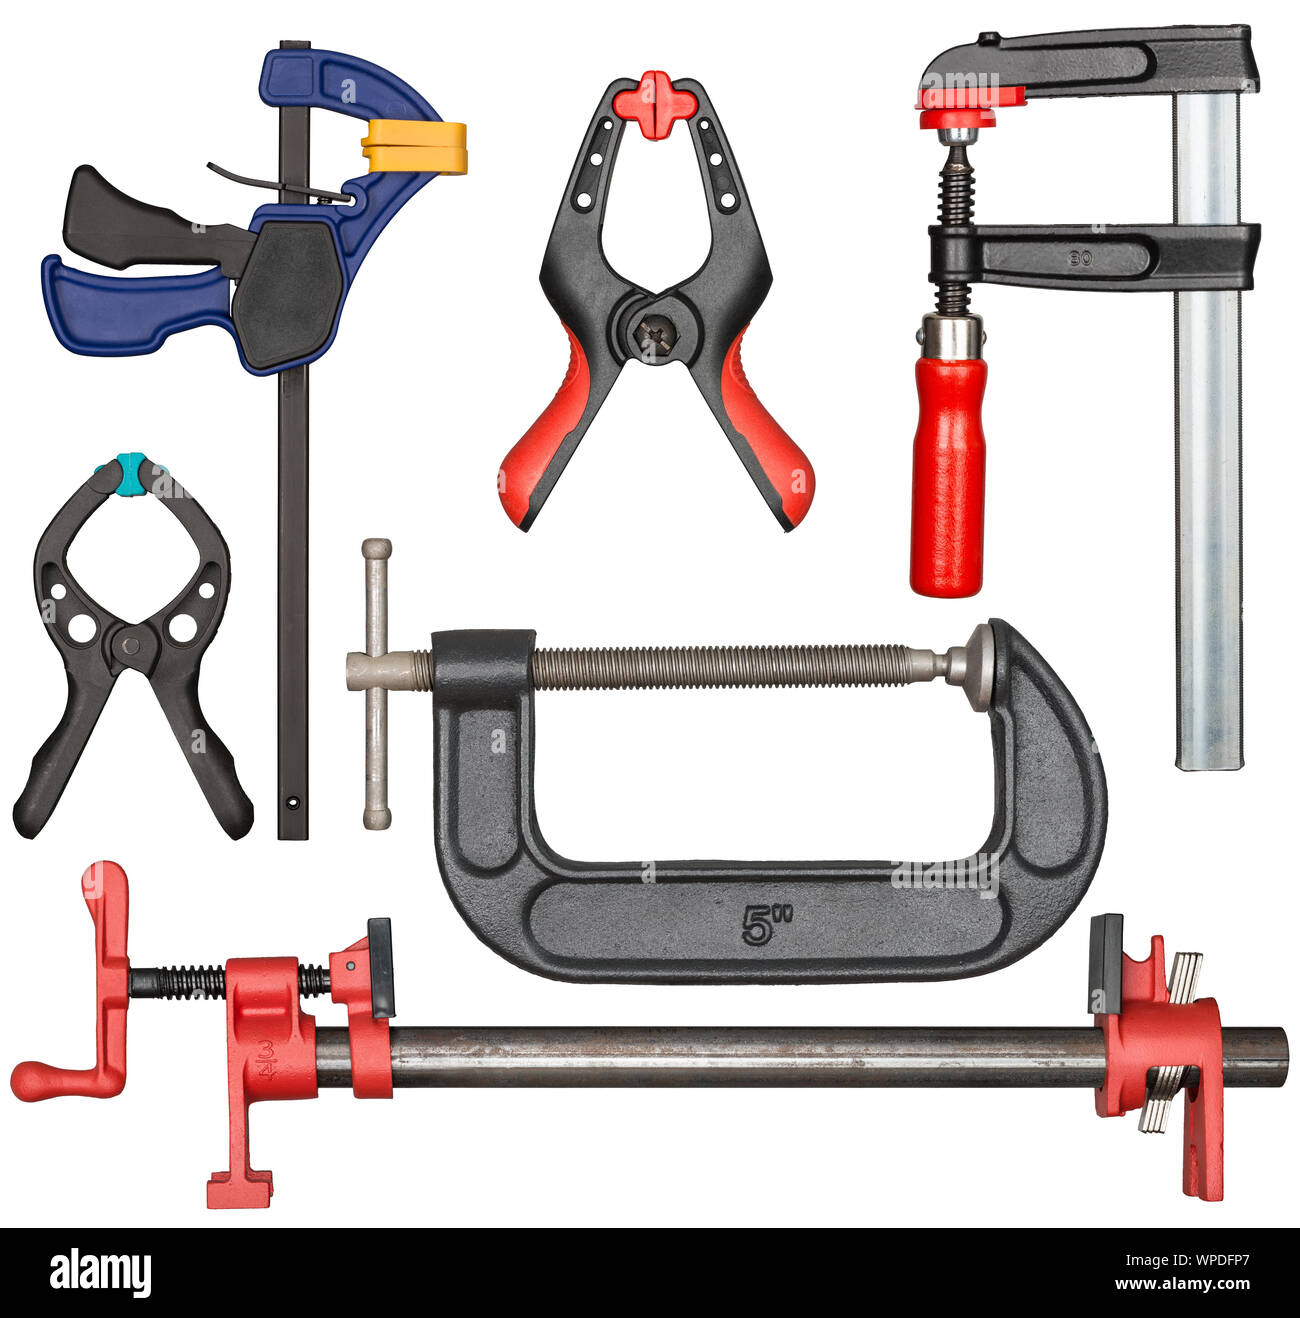 Various bar clamps in set. Tools can be used in carpentry, woodworking or other crafts. Stock Photo